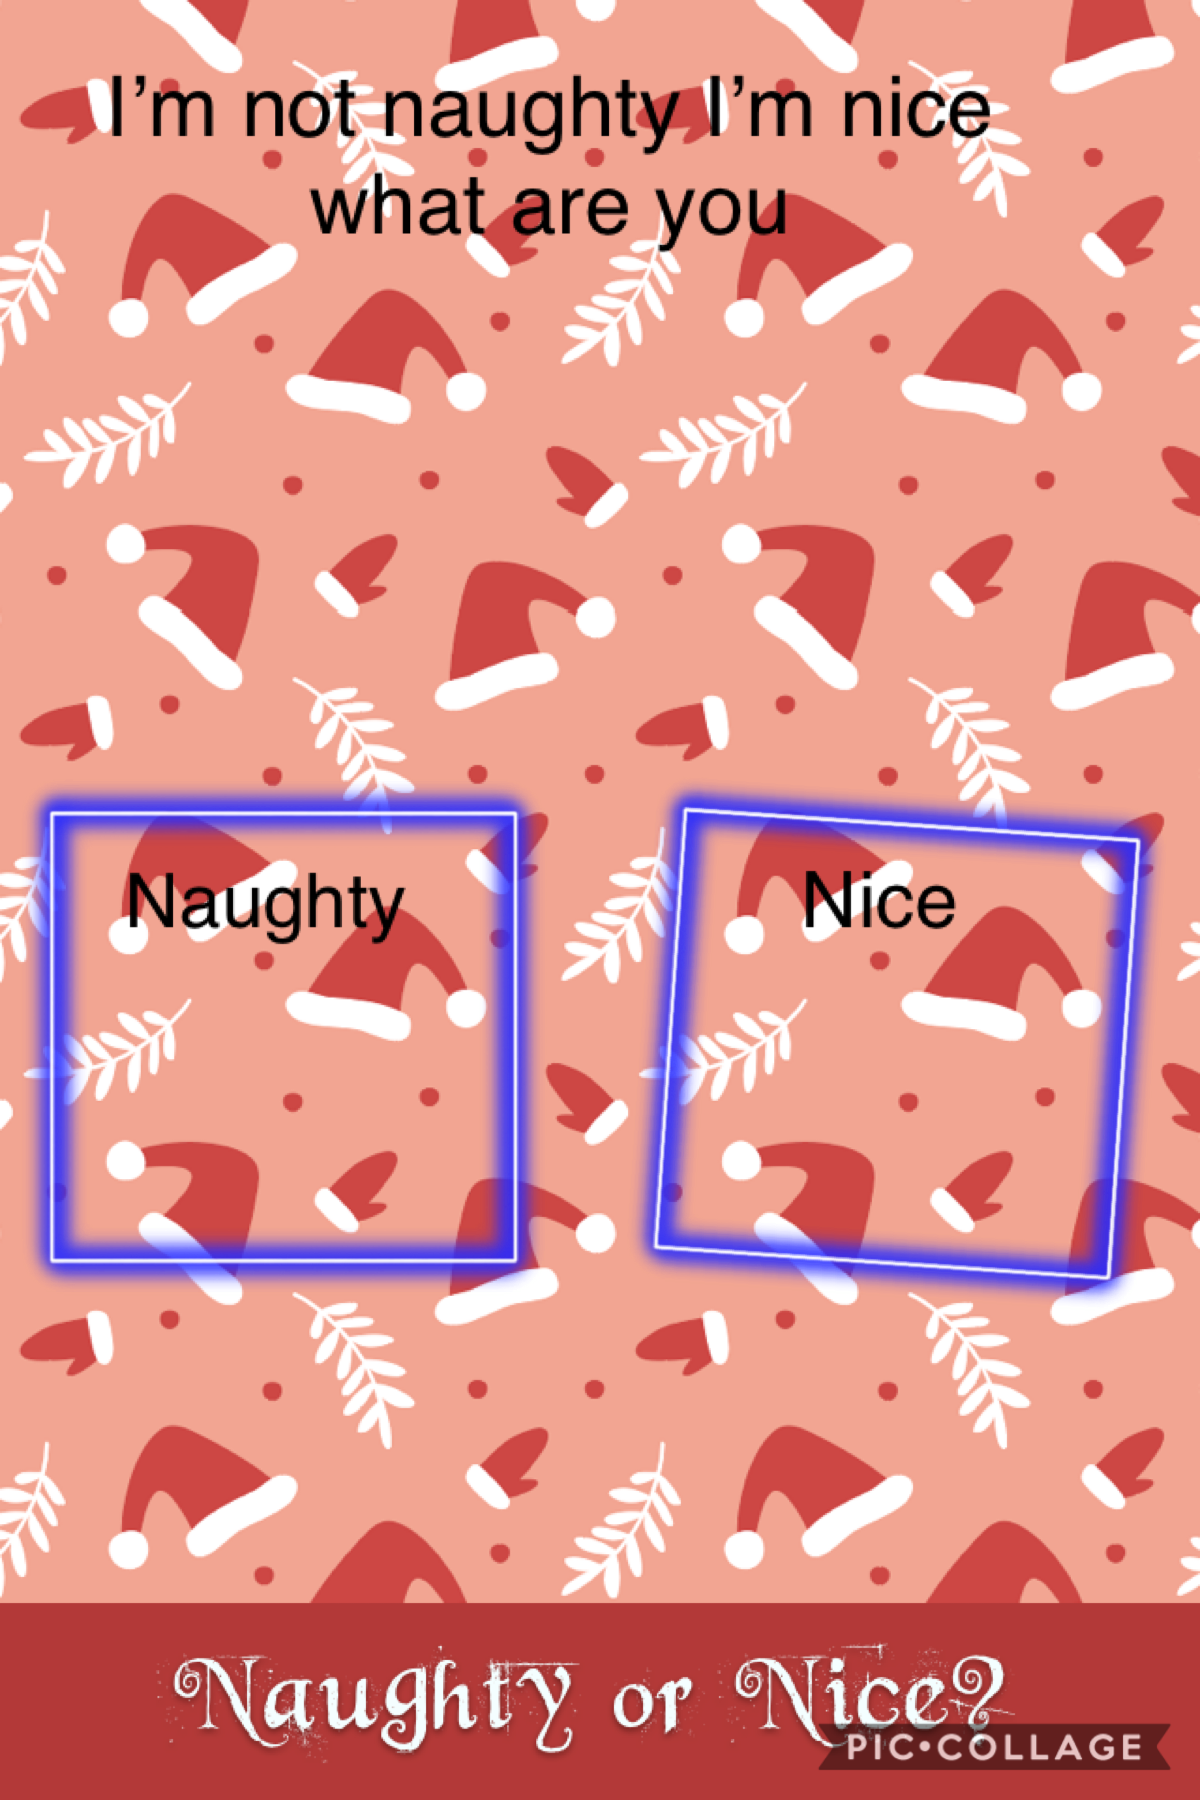 Are you naughty or nice?